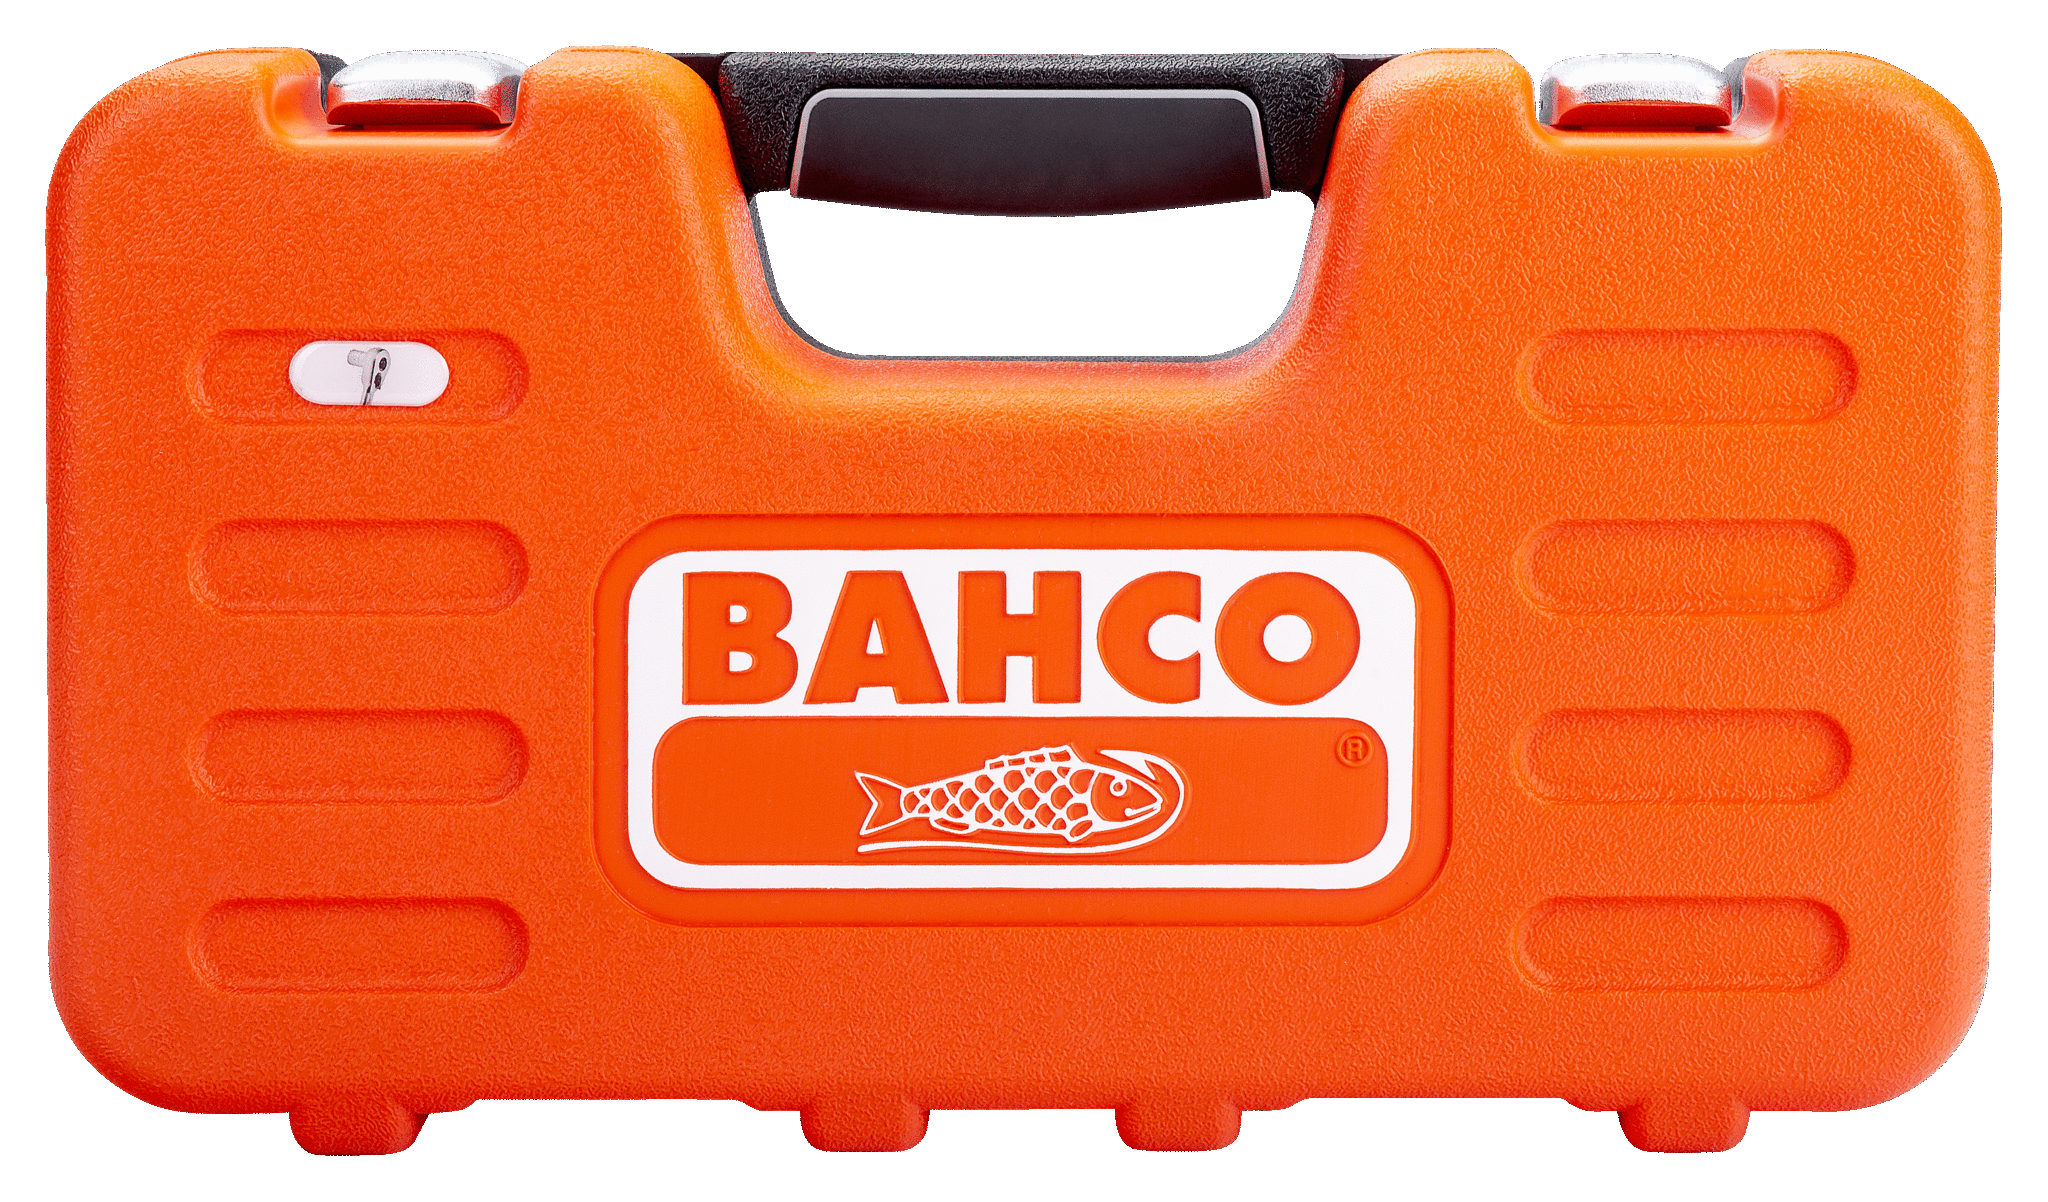 1/4" and 1/2" Square Drive Socket Set with Metric Bi-Hex Profile and Slim Head Ratchet - S560 by Bahco